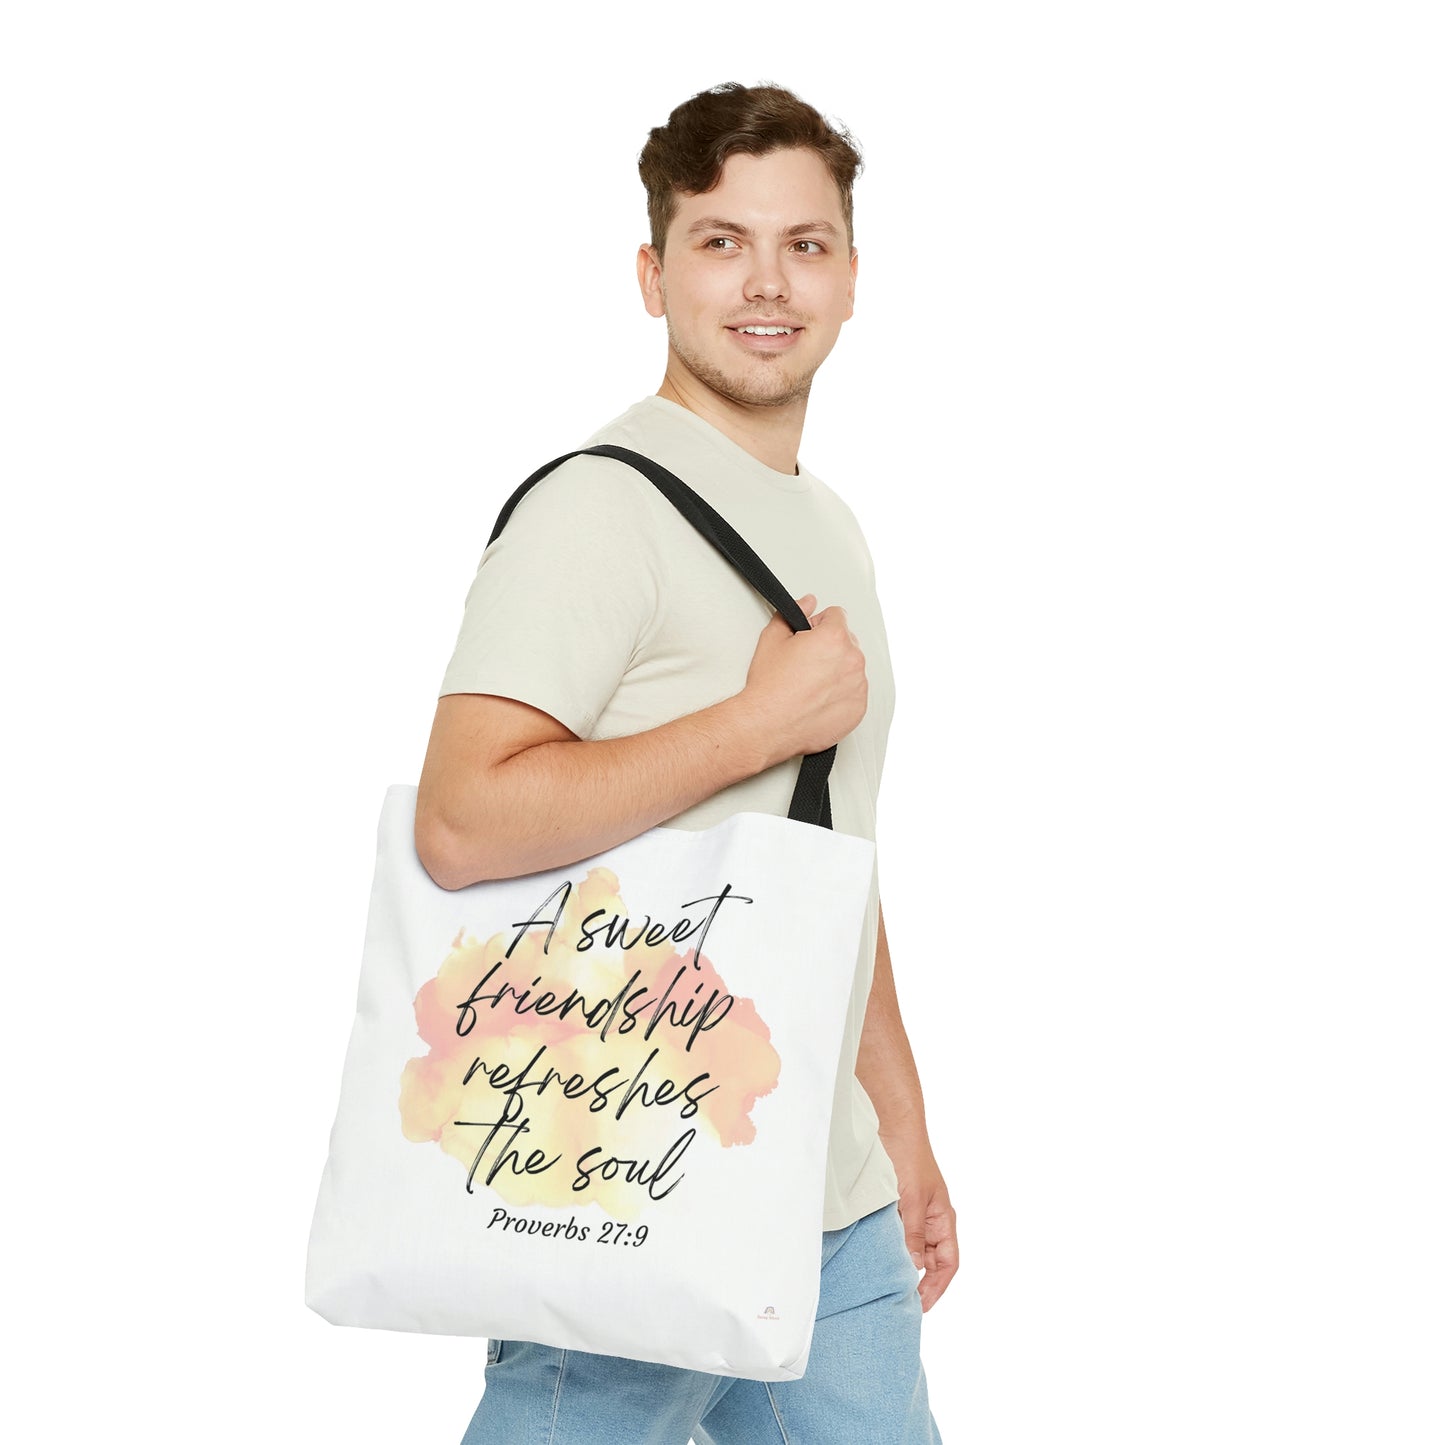 A sweet friendship refreshes the soul- Tote Bag